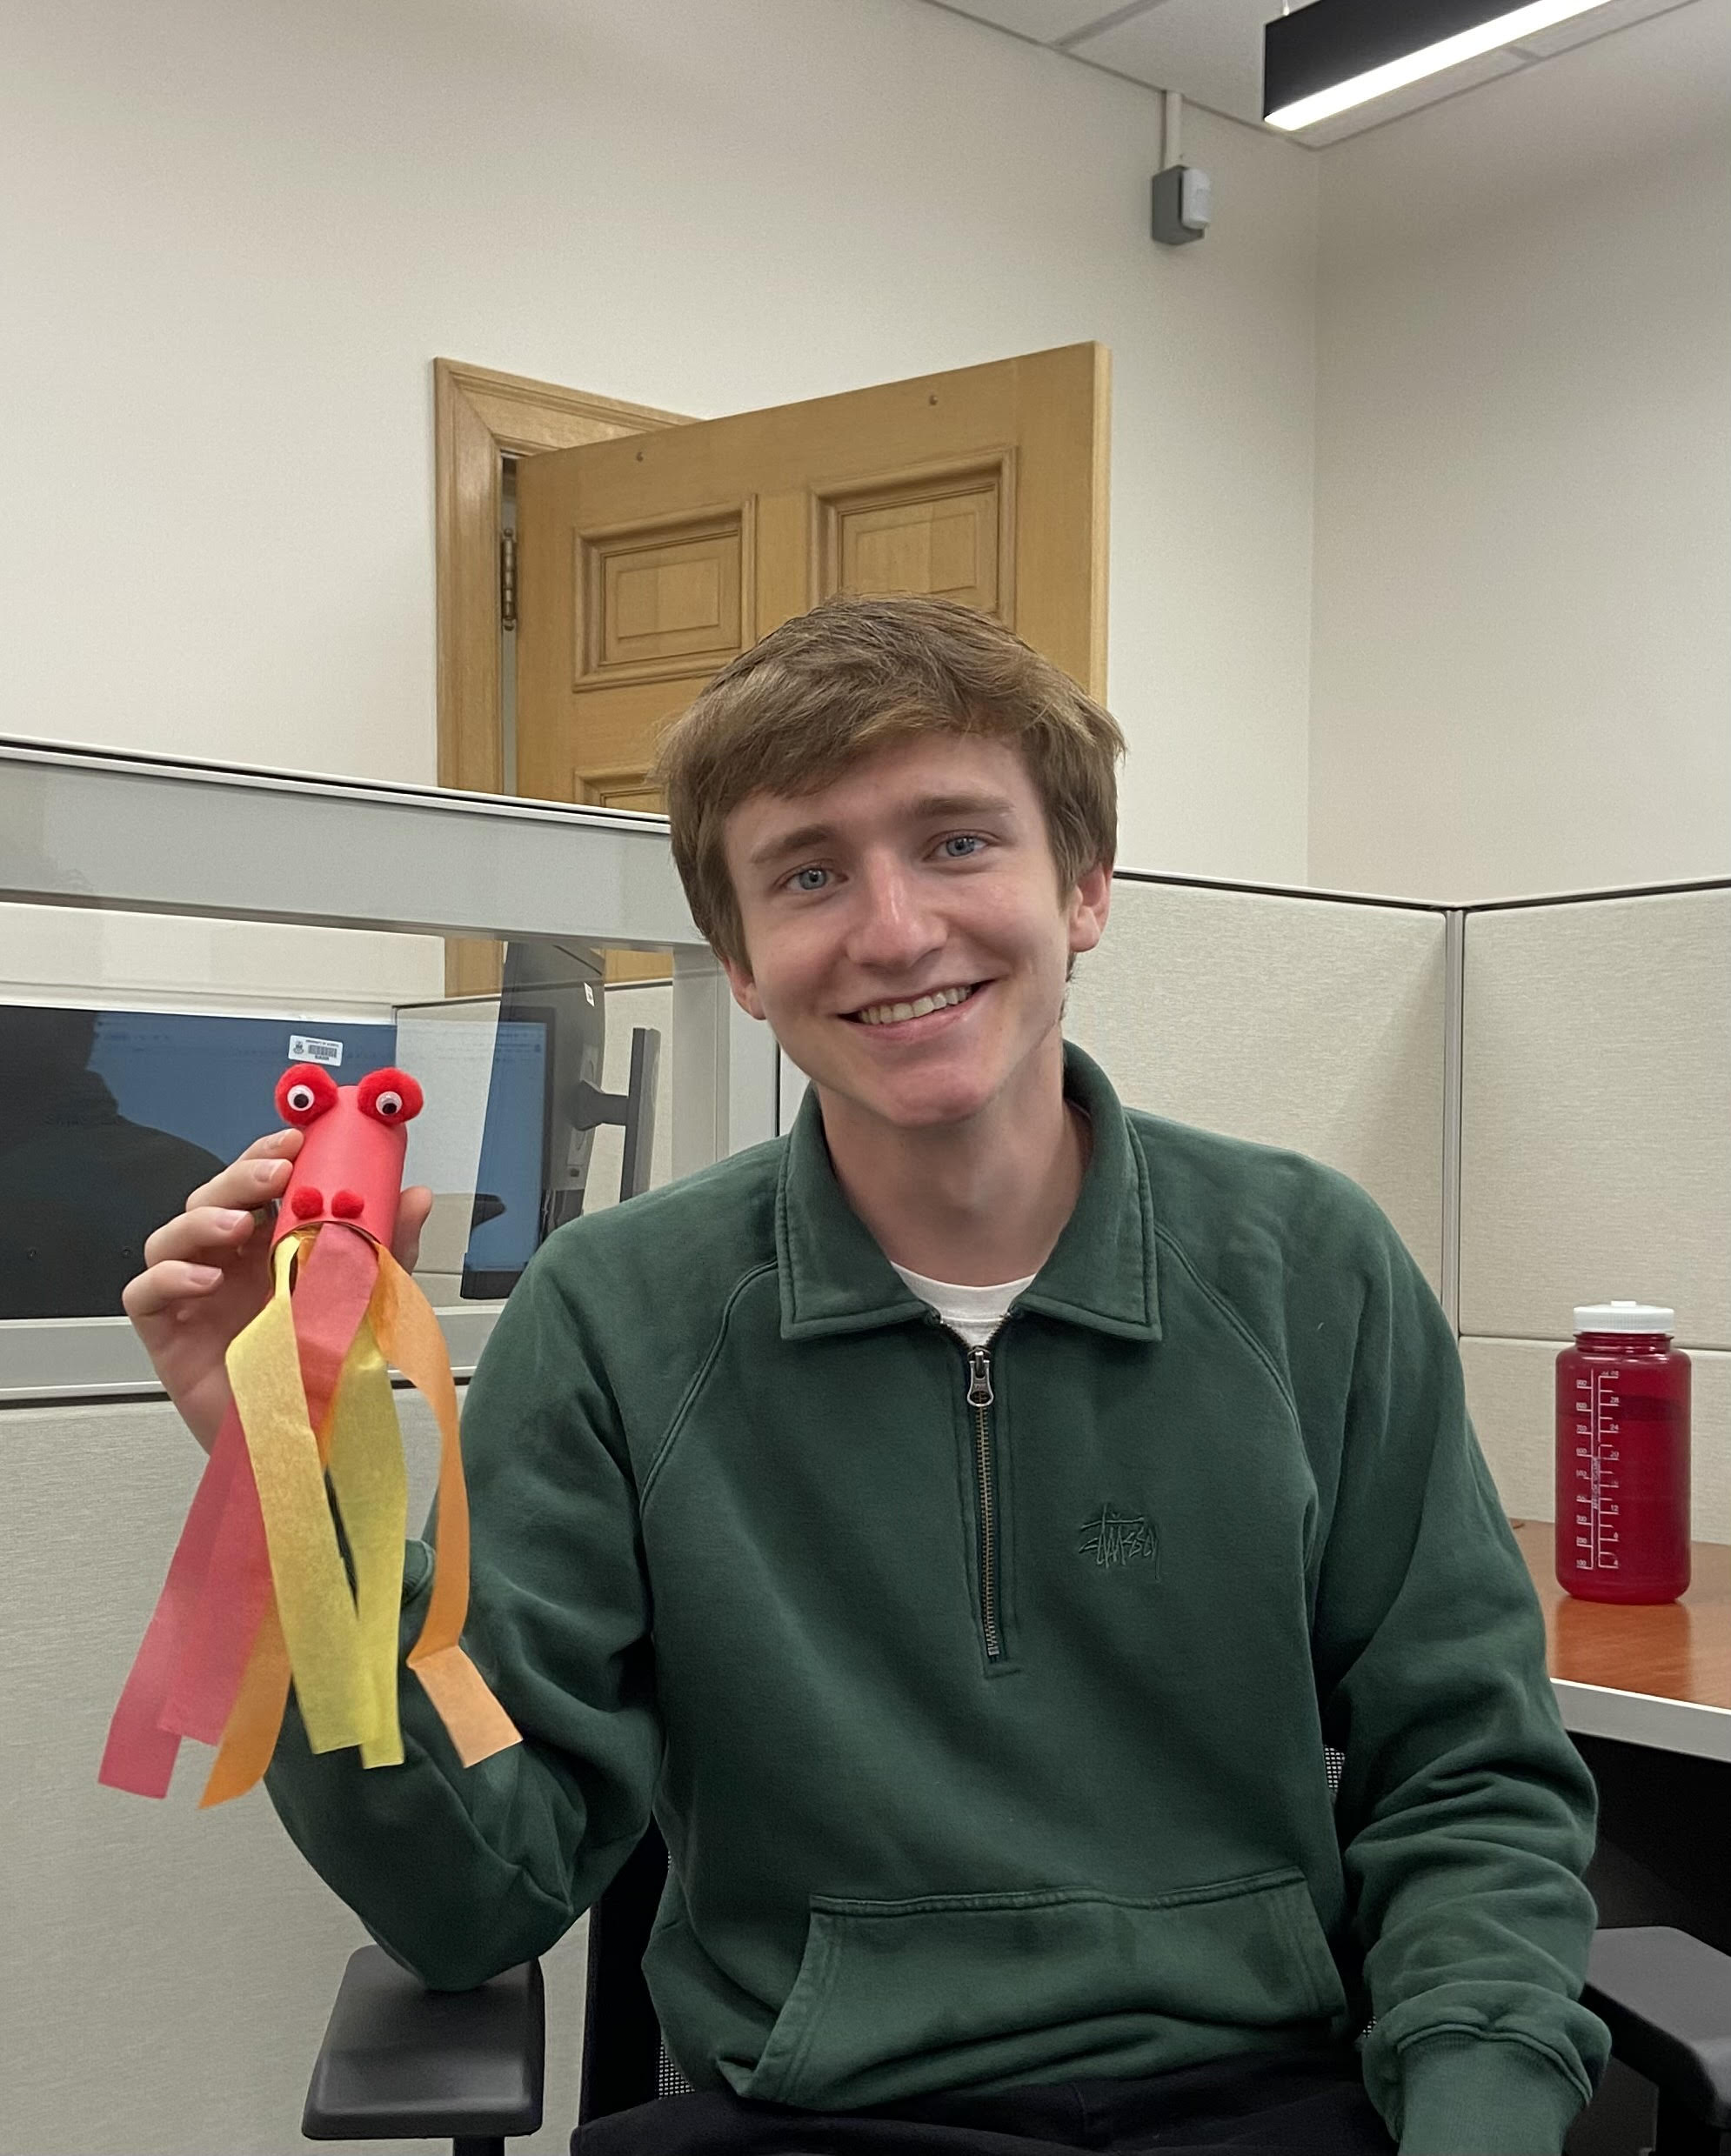 A smiling man in a green shirt, seated in a cubicle, holds up a dragon’s head crafted from colourful tissue paper.